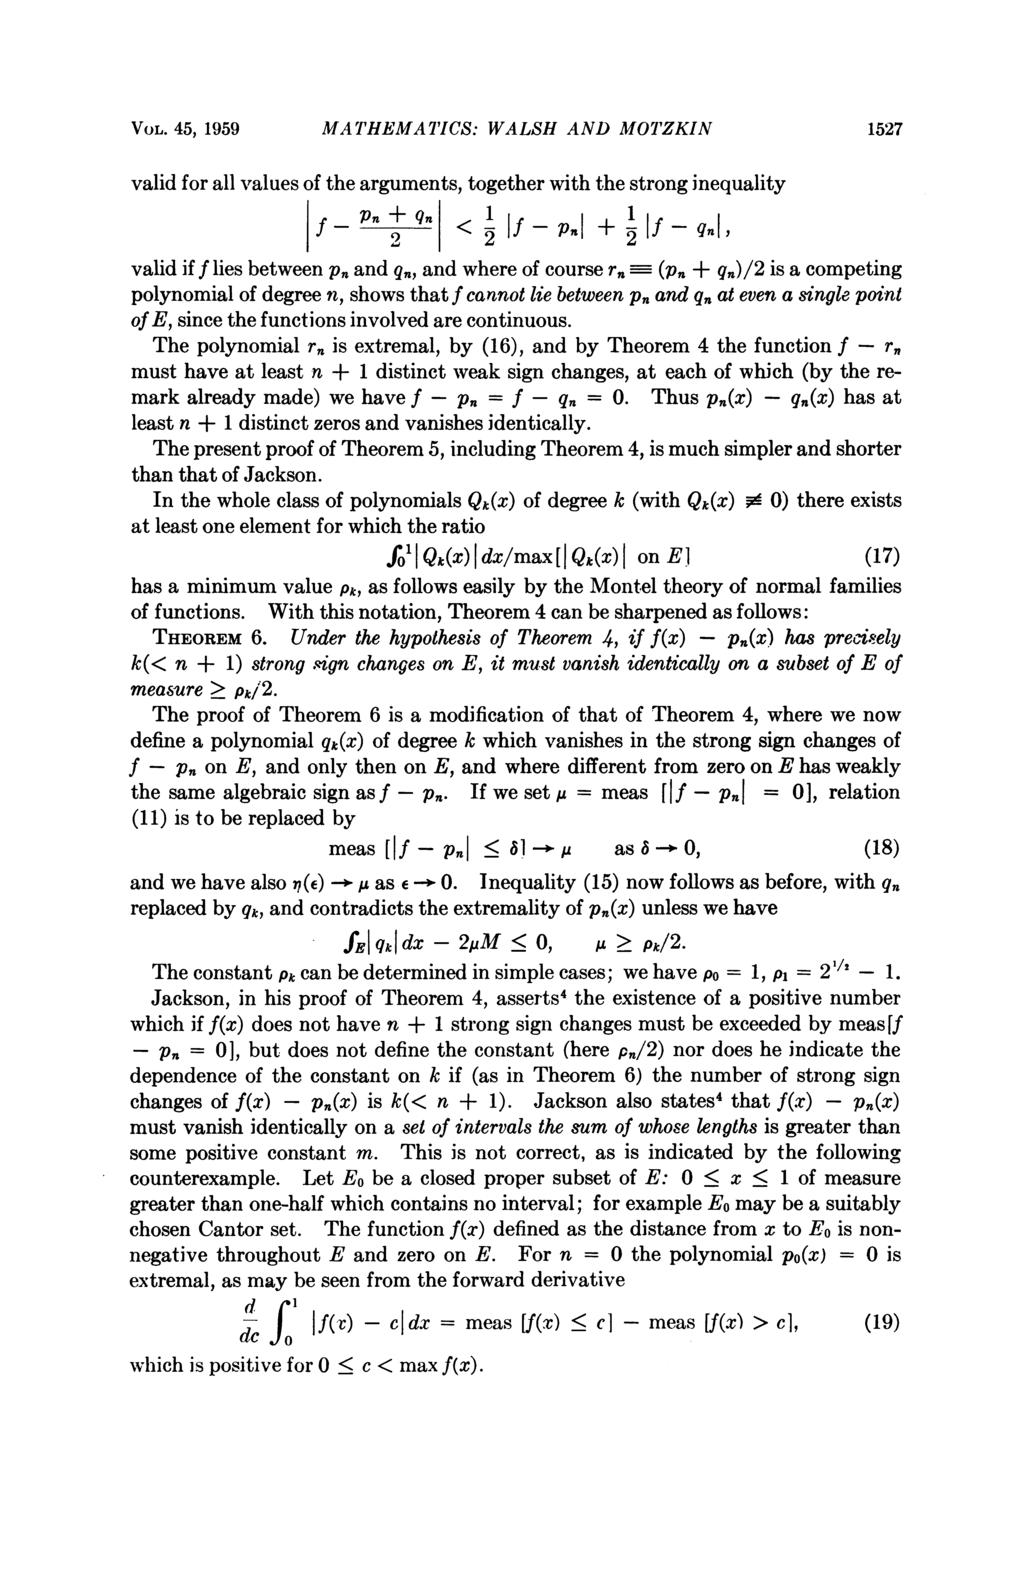 VOL. 45, 1959 MATHEMATICS: WALSH AND MOTZKIN 1527 valid for all values of the arguments, together with the strong inequality f _ Pn + Qn < If - pn + 2If - qnl, valid if f lies between Pn and qn, and